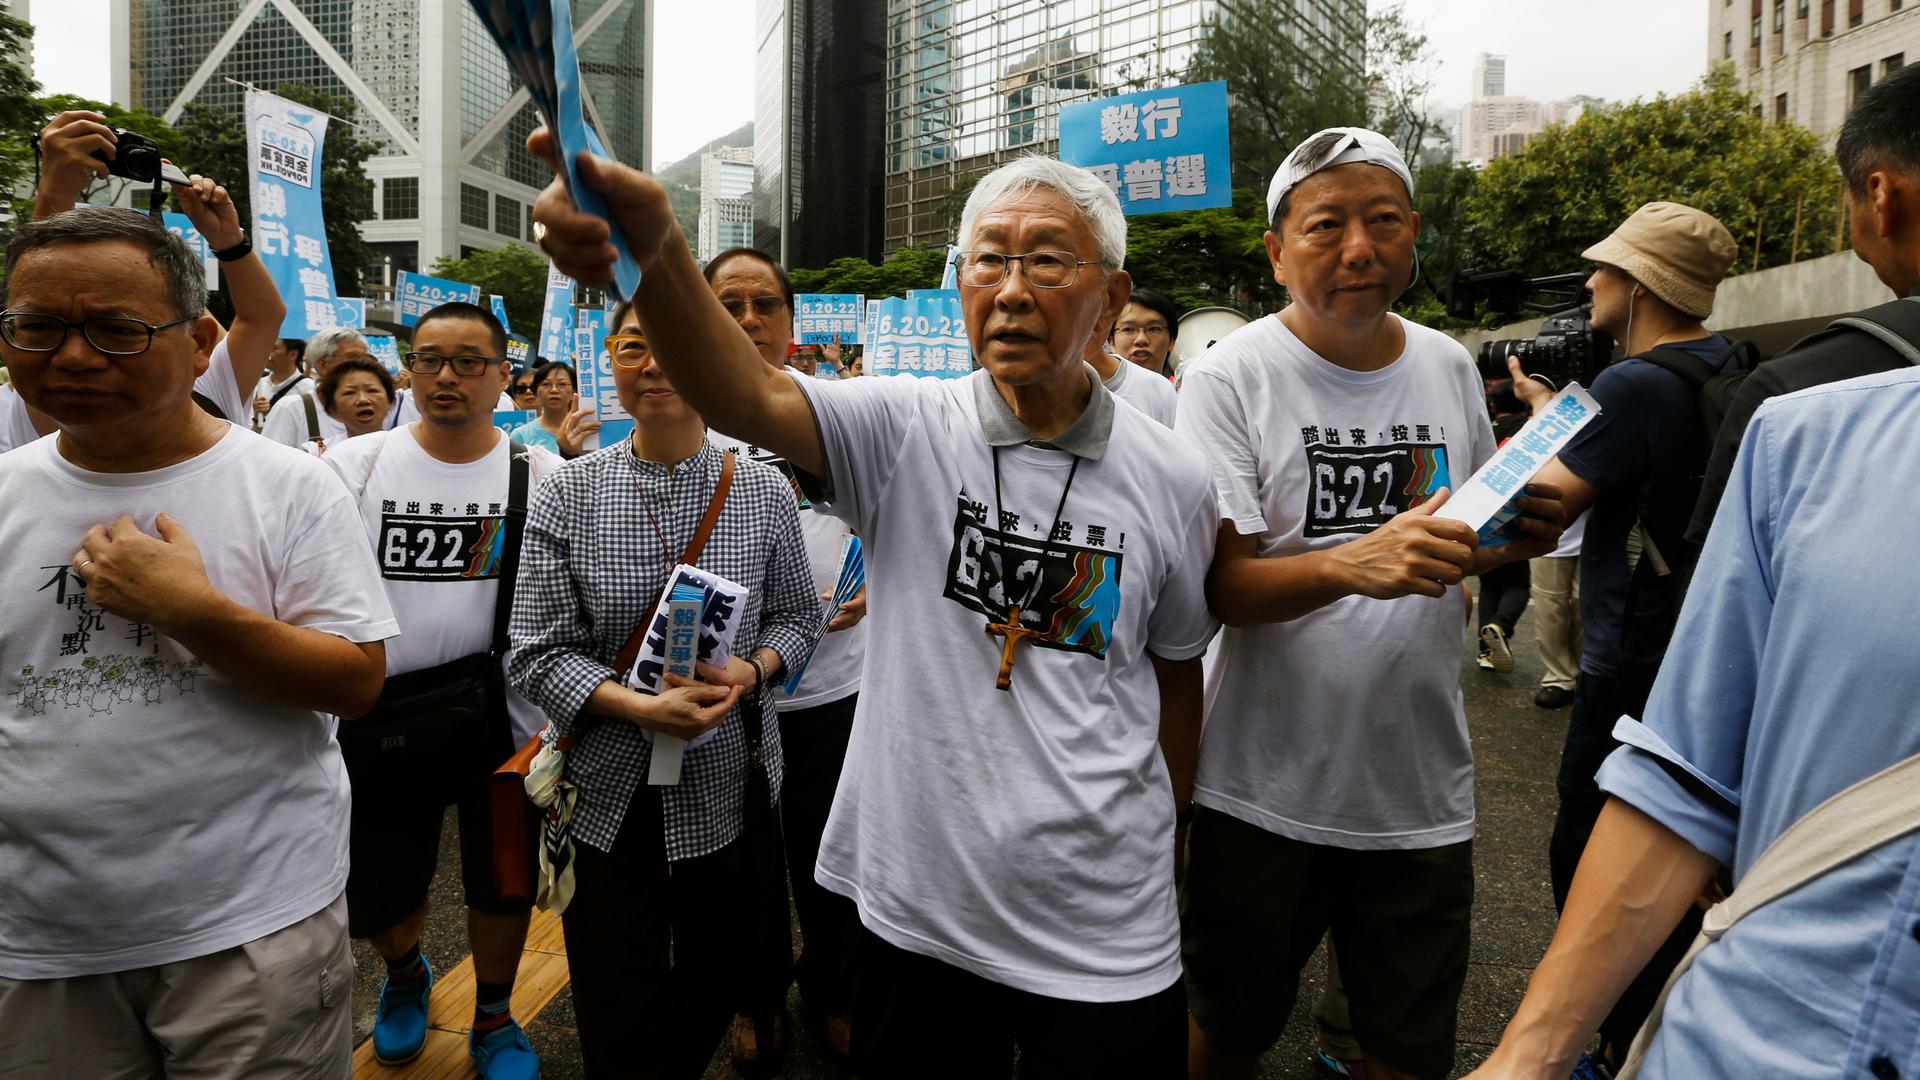 The 82 year-old Cardinal Joseph Zen (center) is the former head of the Roman Catholic Church in Hong Kong and a supporter of the student-led pro-democracy campaign in the Chinese territory. 